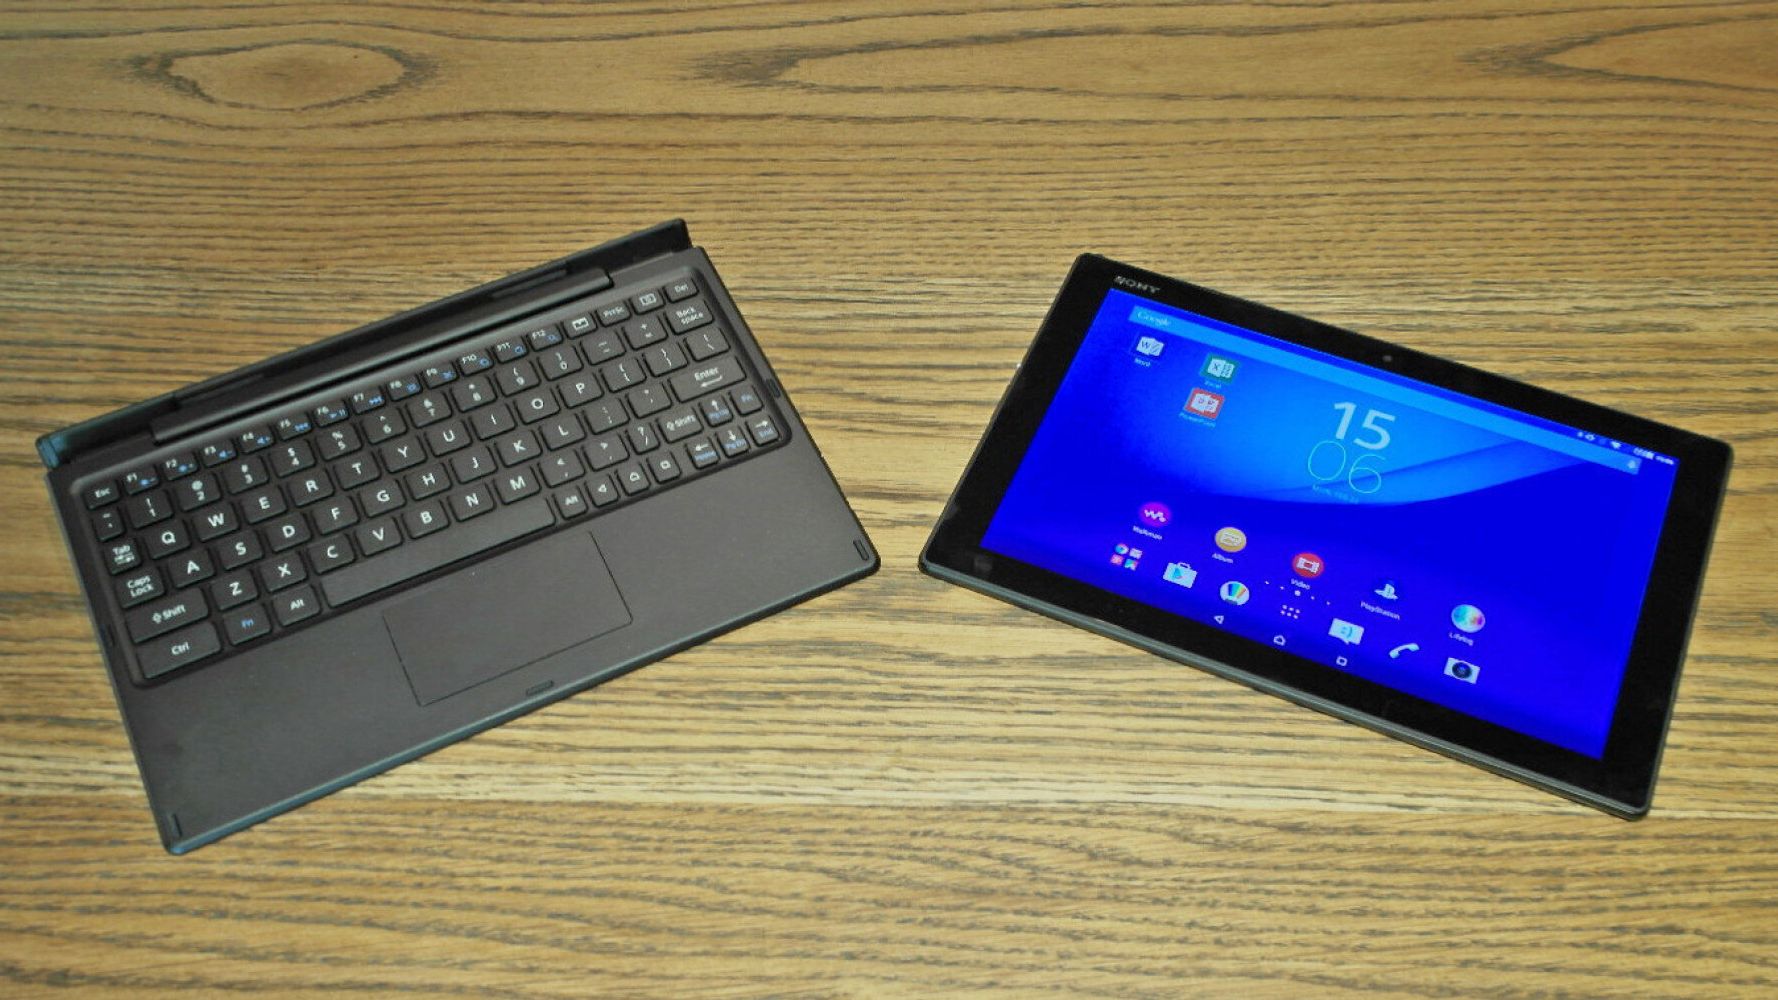 Sony Xperia Z4 Tablet Hands On Review The 2k Tablet That Thinks It S A Chromebook Huffpost Uk Tech